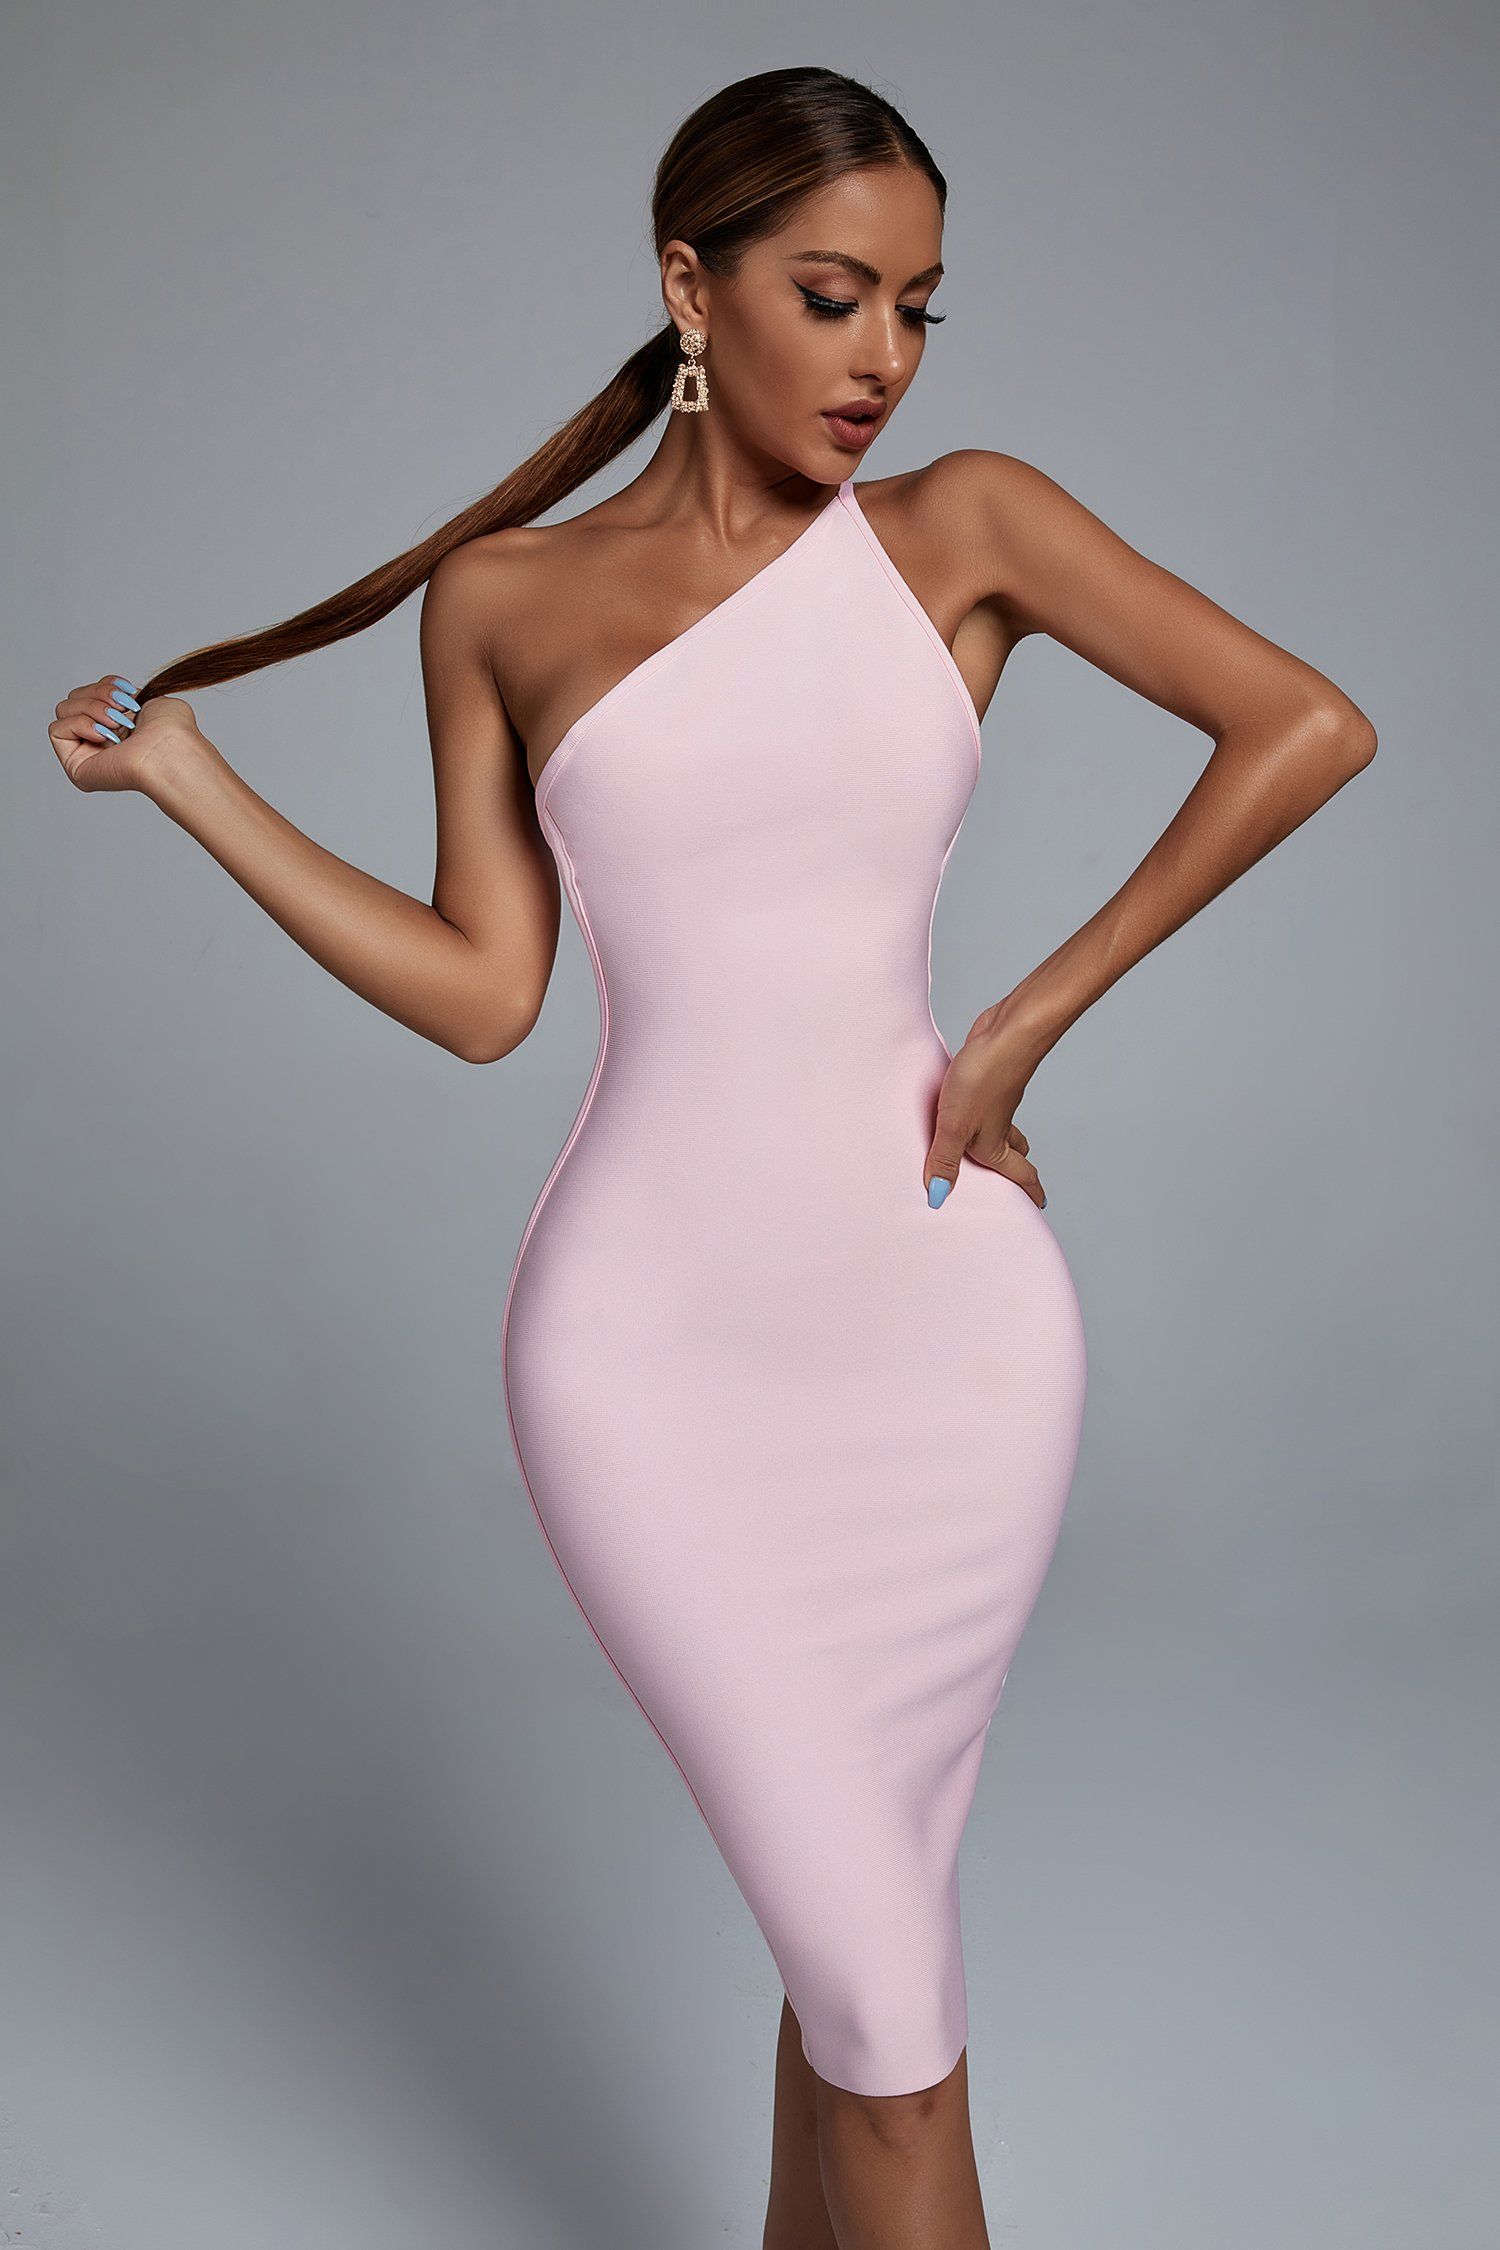 Pink Bandage Dress Outfit
  Ideas